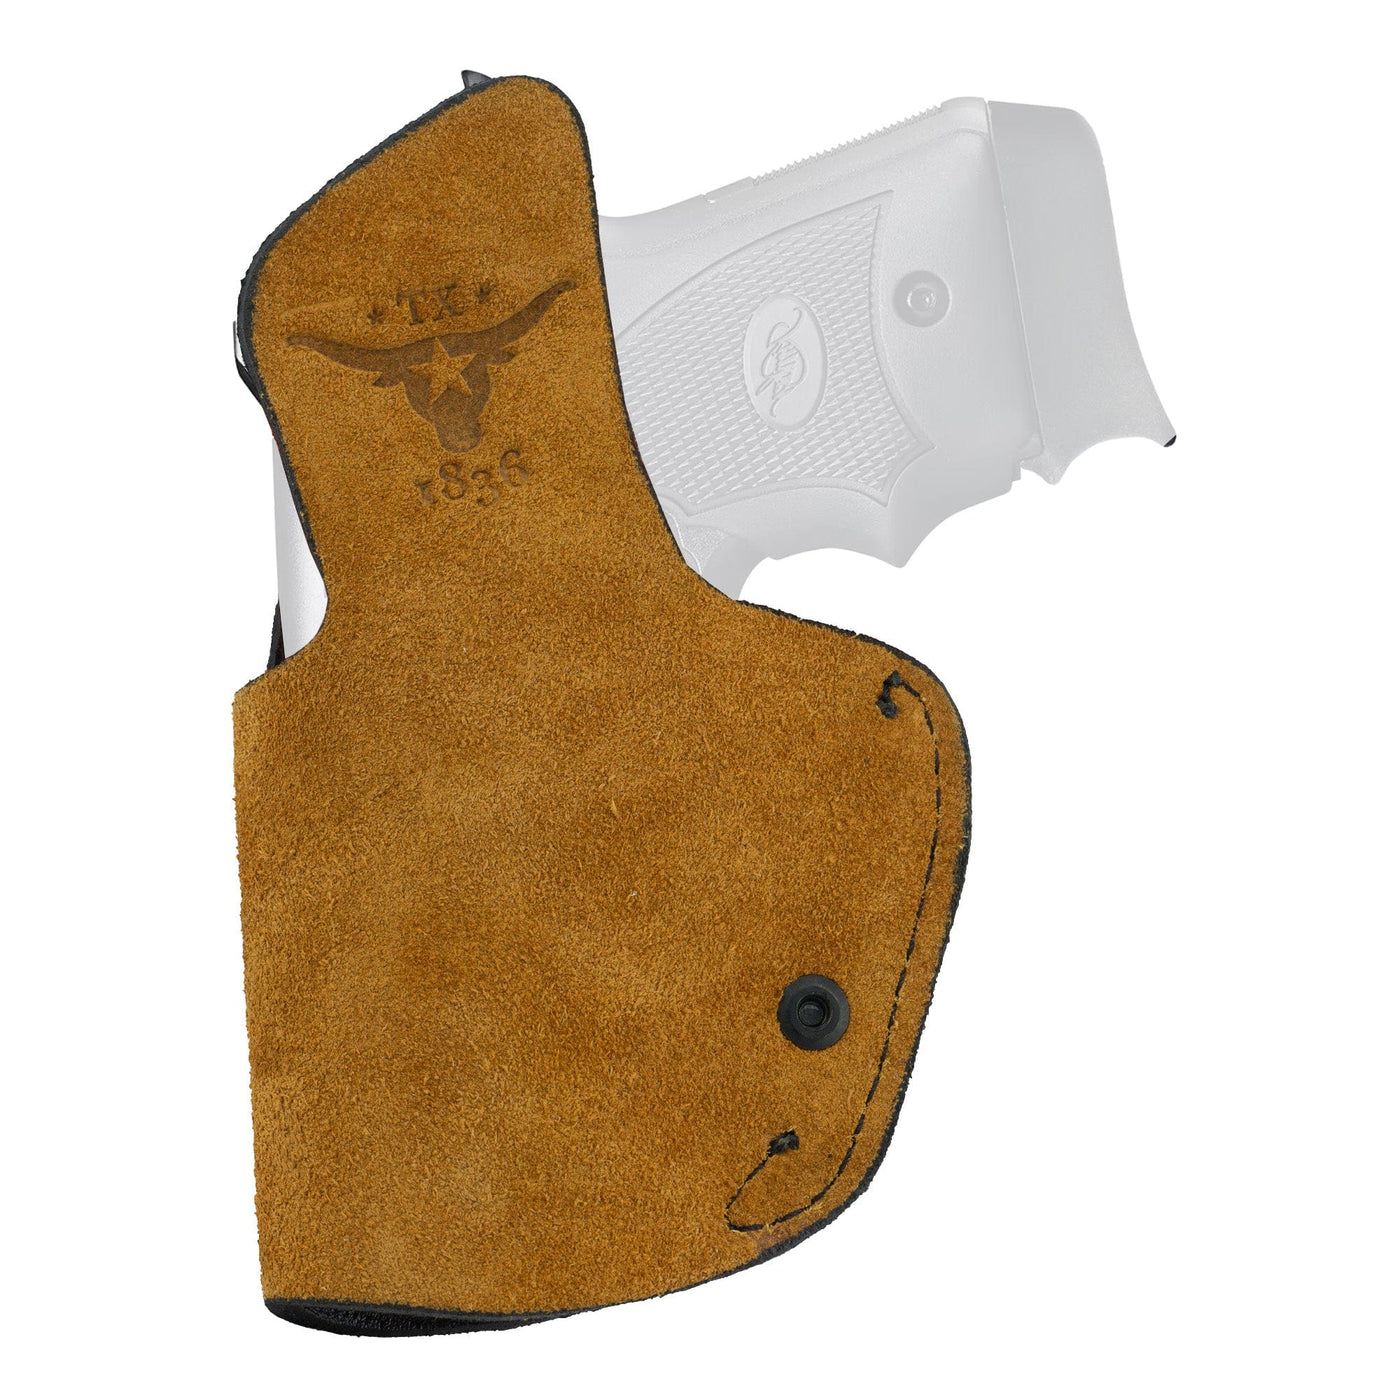 Tagua Tag Iwb Or Holster For Glock 19 Brown Holsters